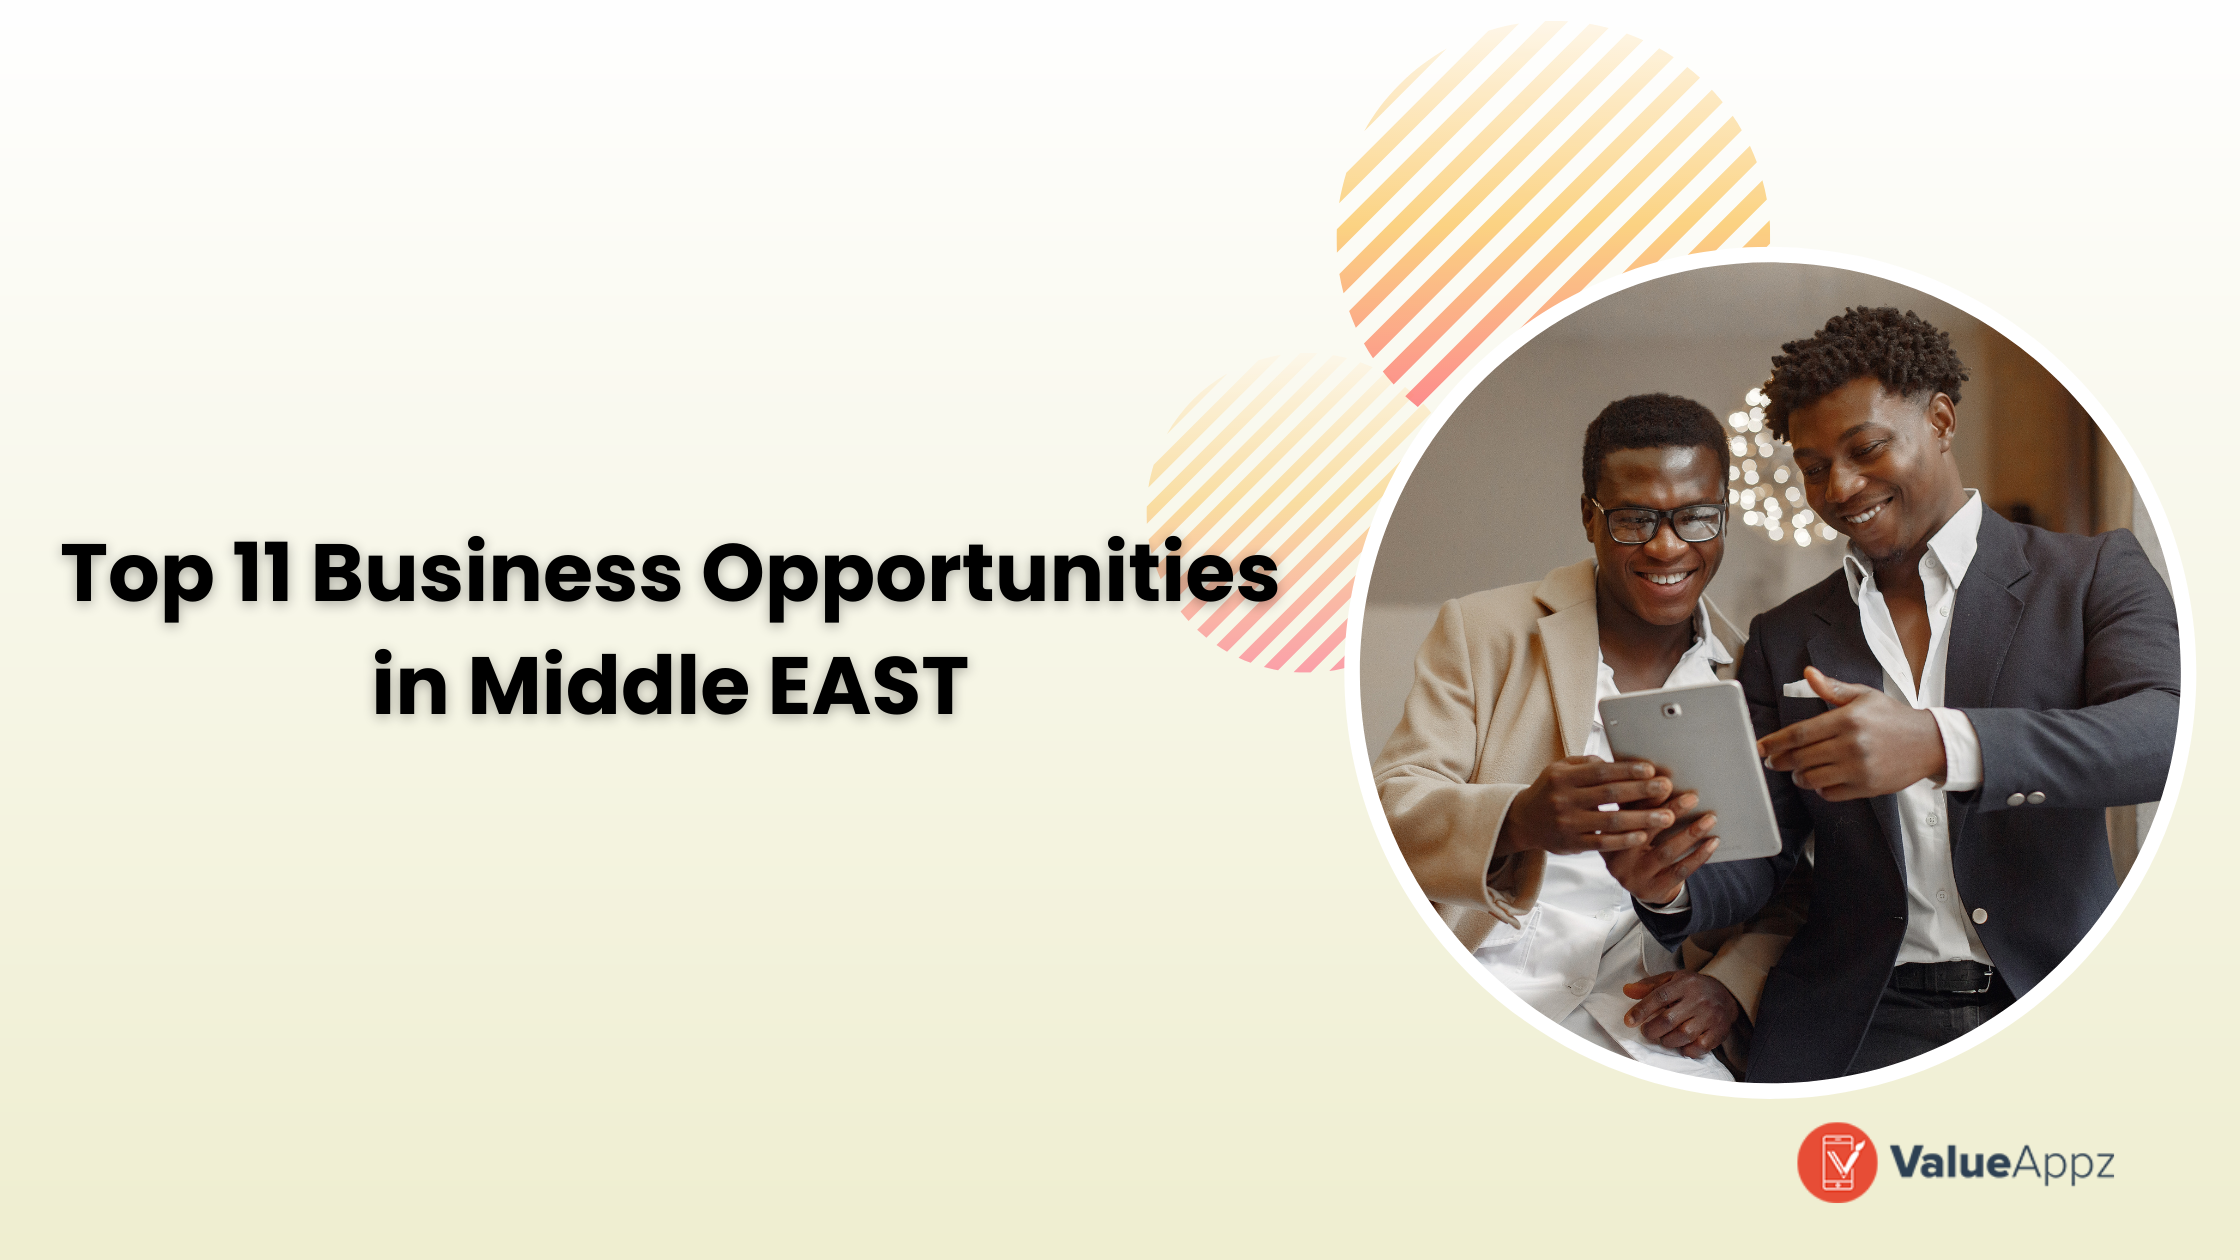 Top 11 Business Opportunities to Explore in the Middle East